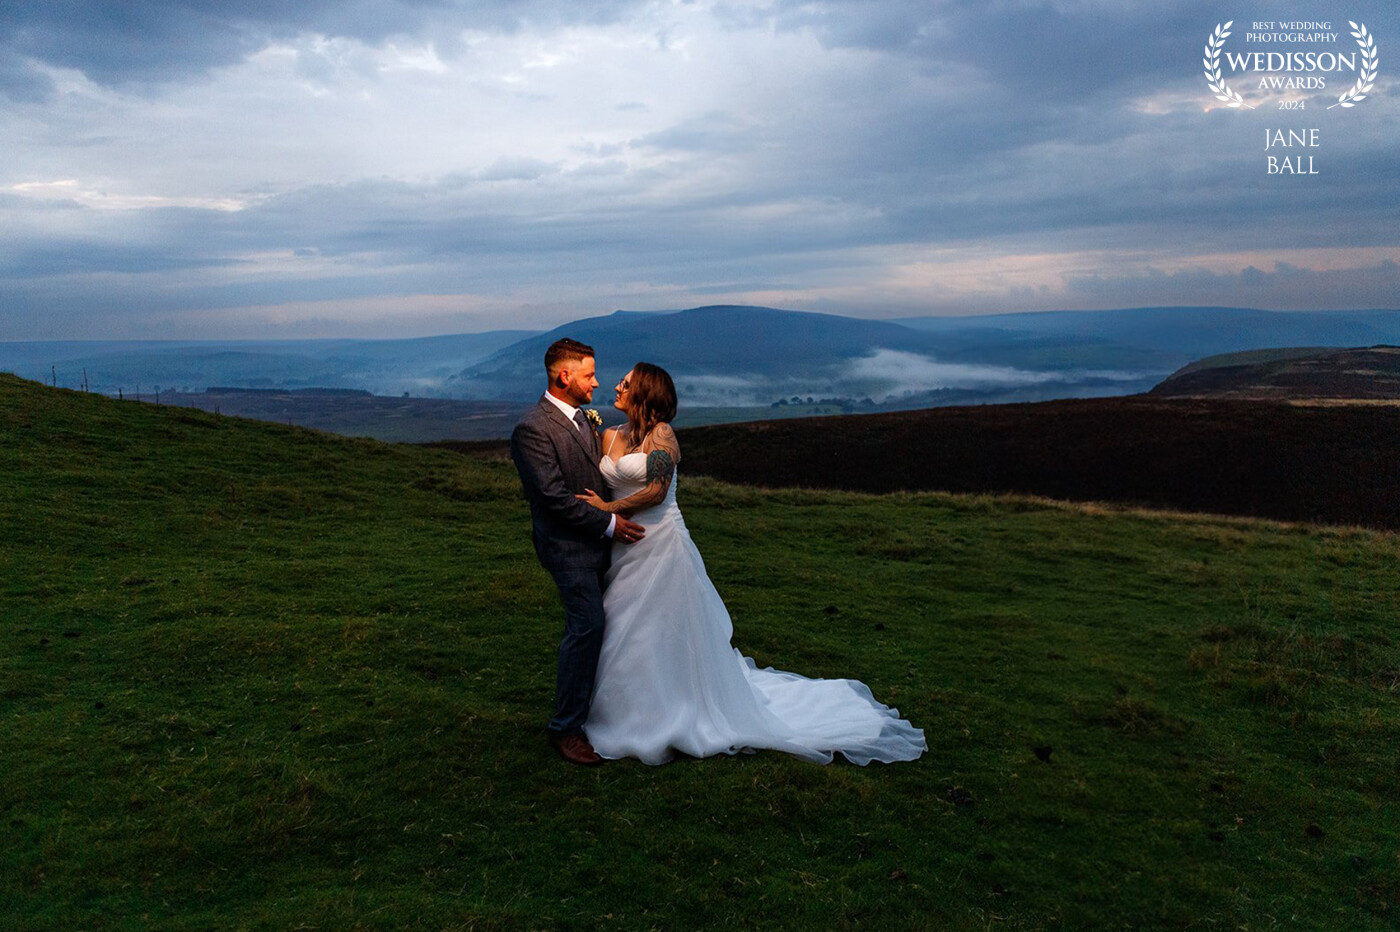 This was a beautiful twilight wedding at The Priests House and Old Chapel in Yorkshire. My couple wanted some dramatic portraits and as it had rained most of the day with the odd rumble of thunder, when the mist came rolling in I knew we just had to drive out onto the surrounding moorland. Using off camera flash to light the couple I underexposed the scene to bring even more drama to the background. When I saw the resulting image on the lcd screen I knew I'd got something special.